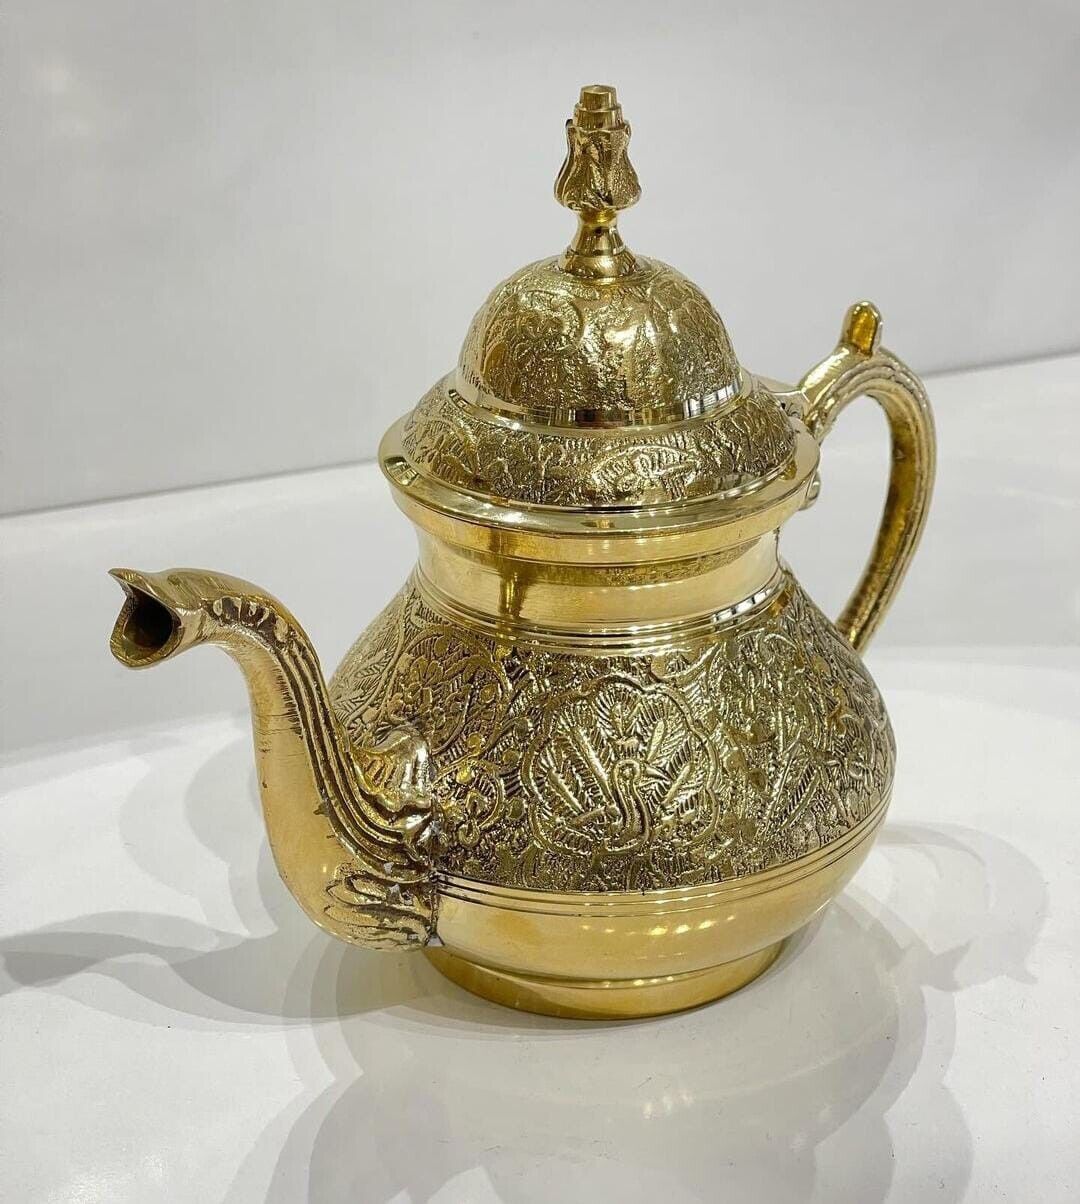 Exquisite Handcrafted Copper Tea Kettle - Traditional Moroccan Elegance